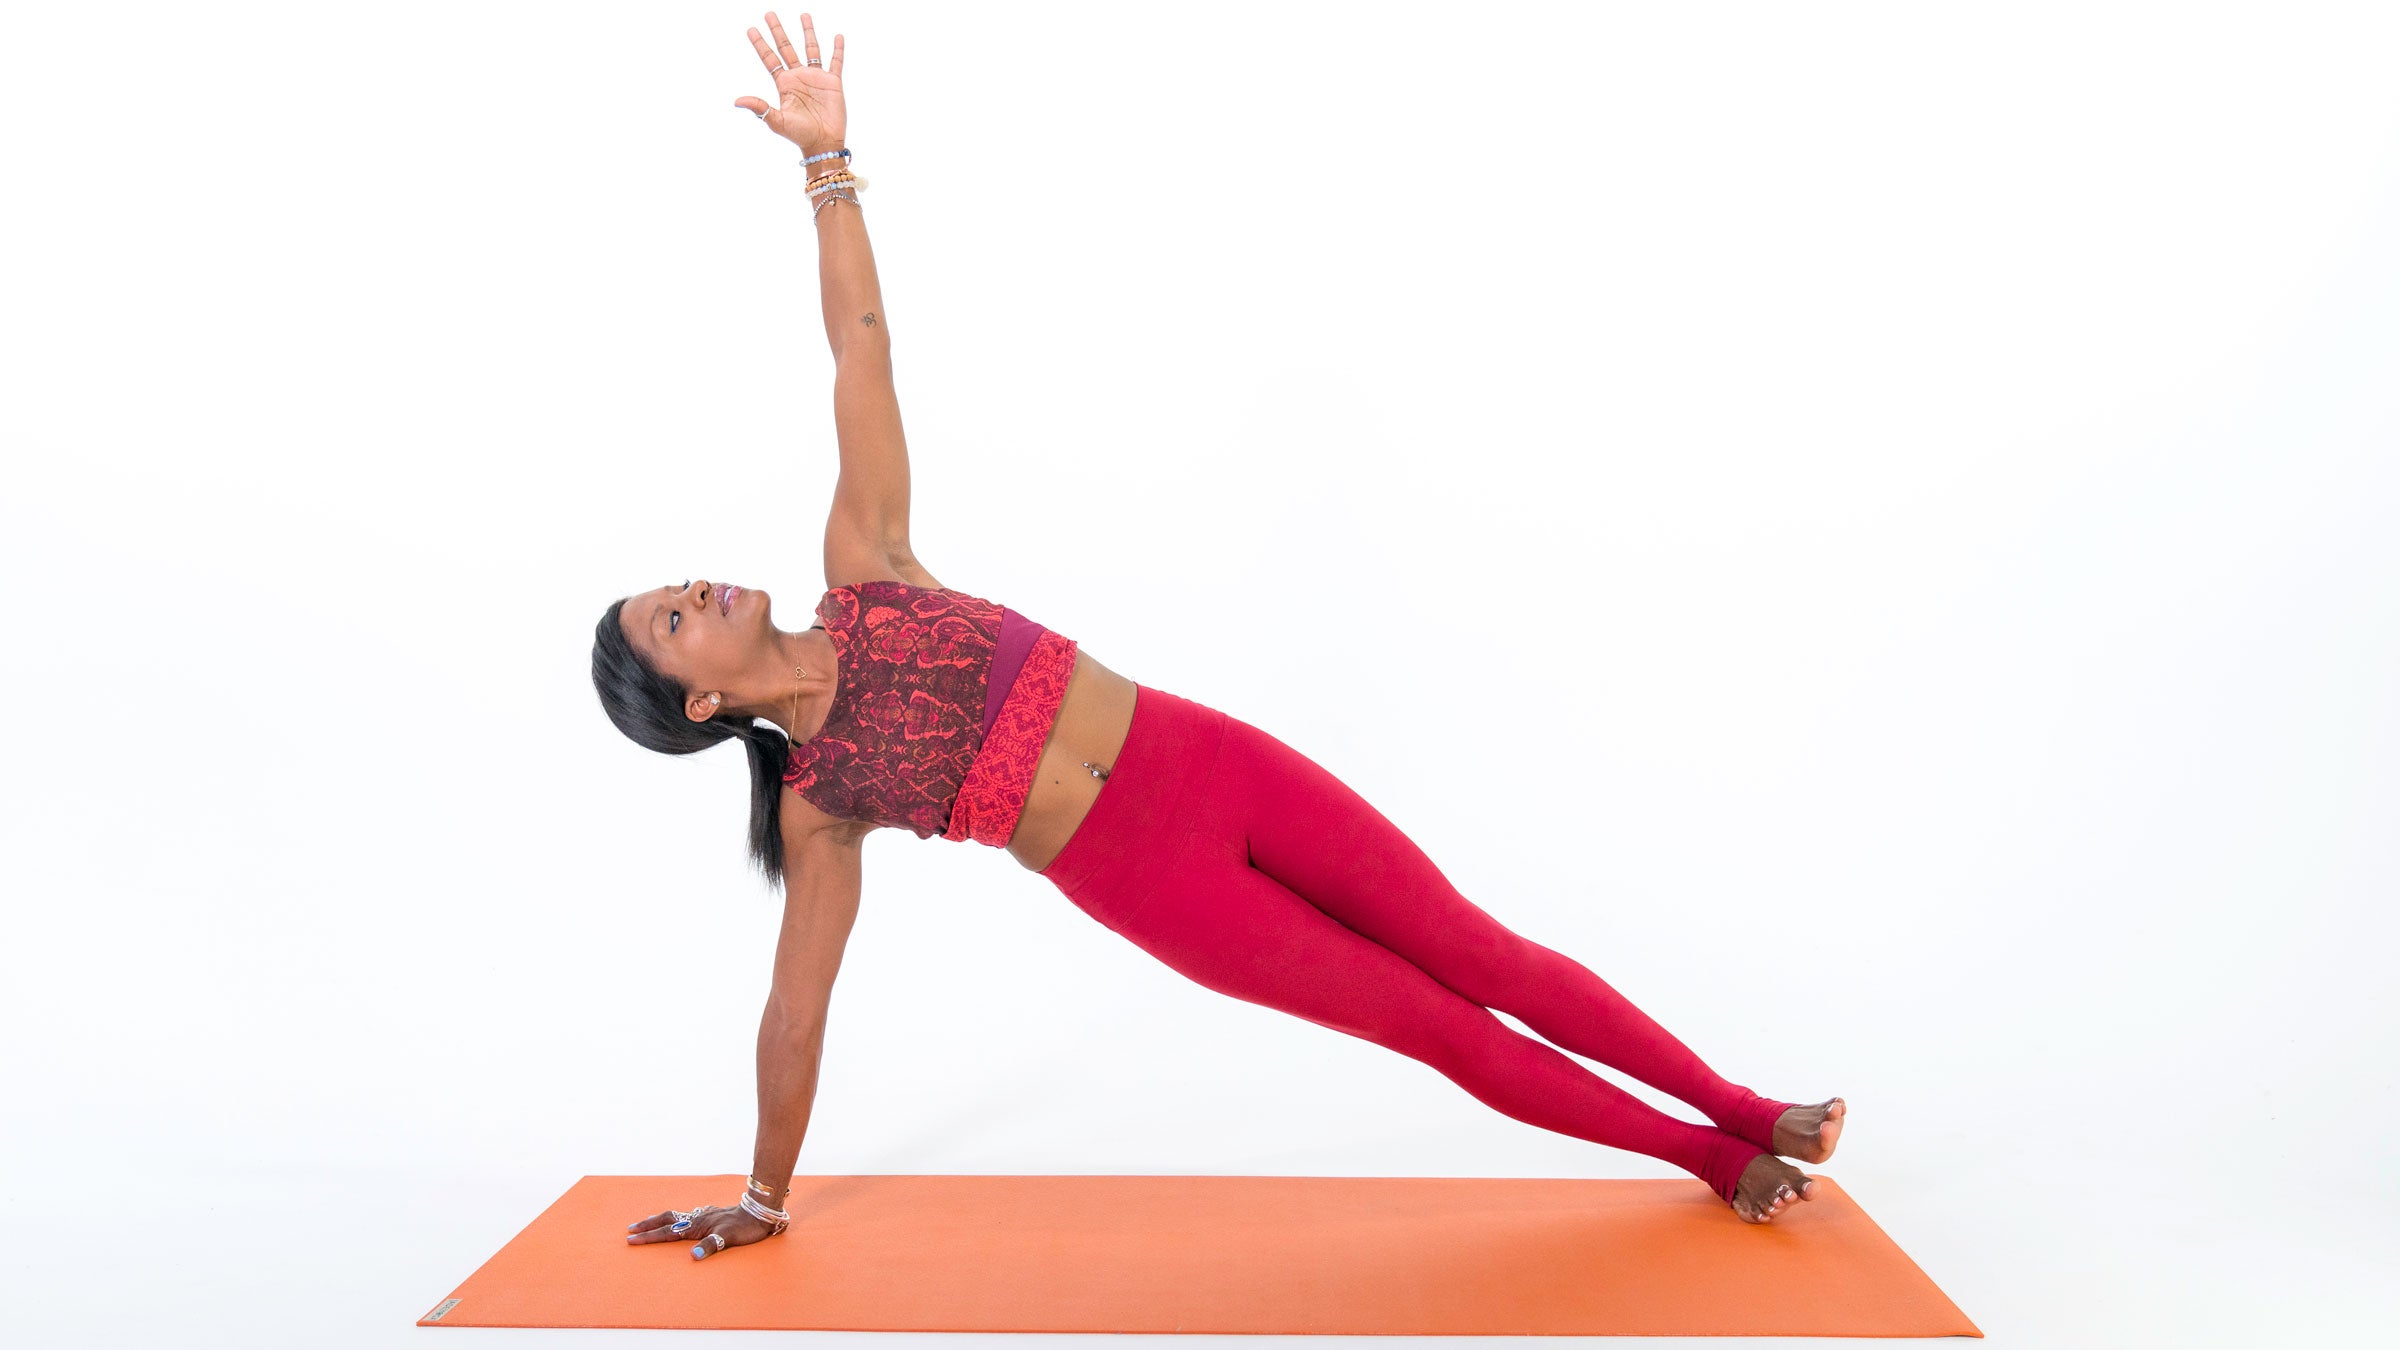 Best Yoga Poses & Sequences for abs, a flat belly & a strong core: Get a  Strong Core with Your Yoga Practice! - SoMuchYoga.com